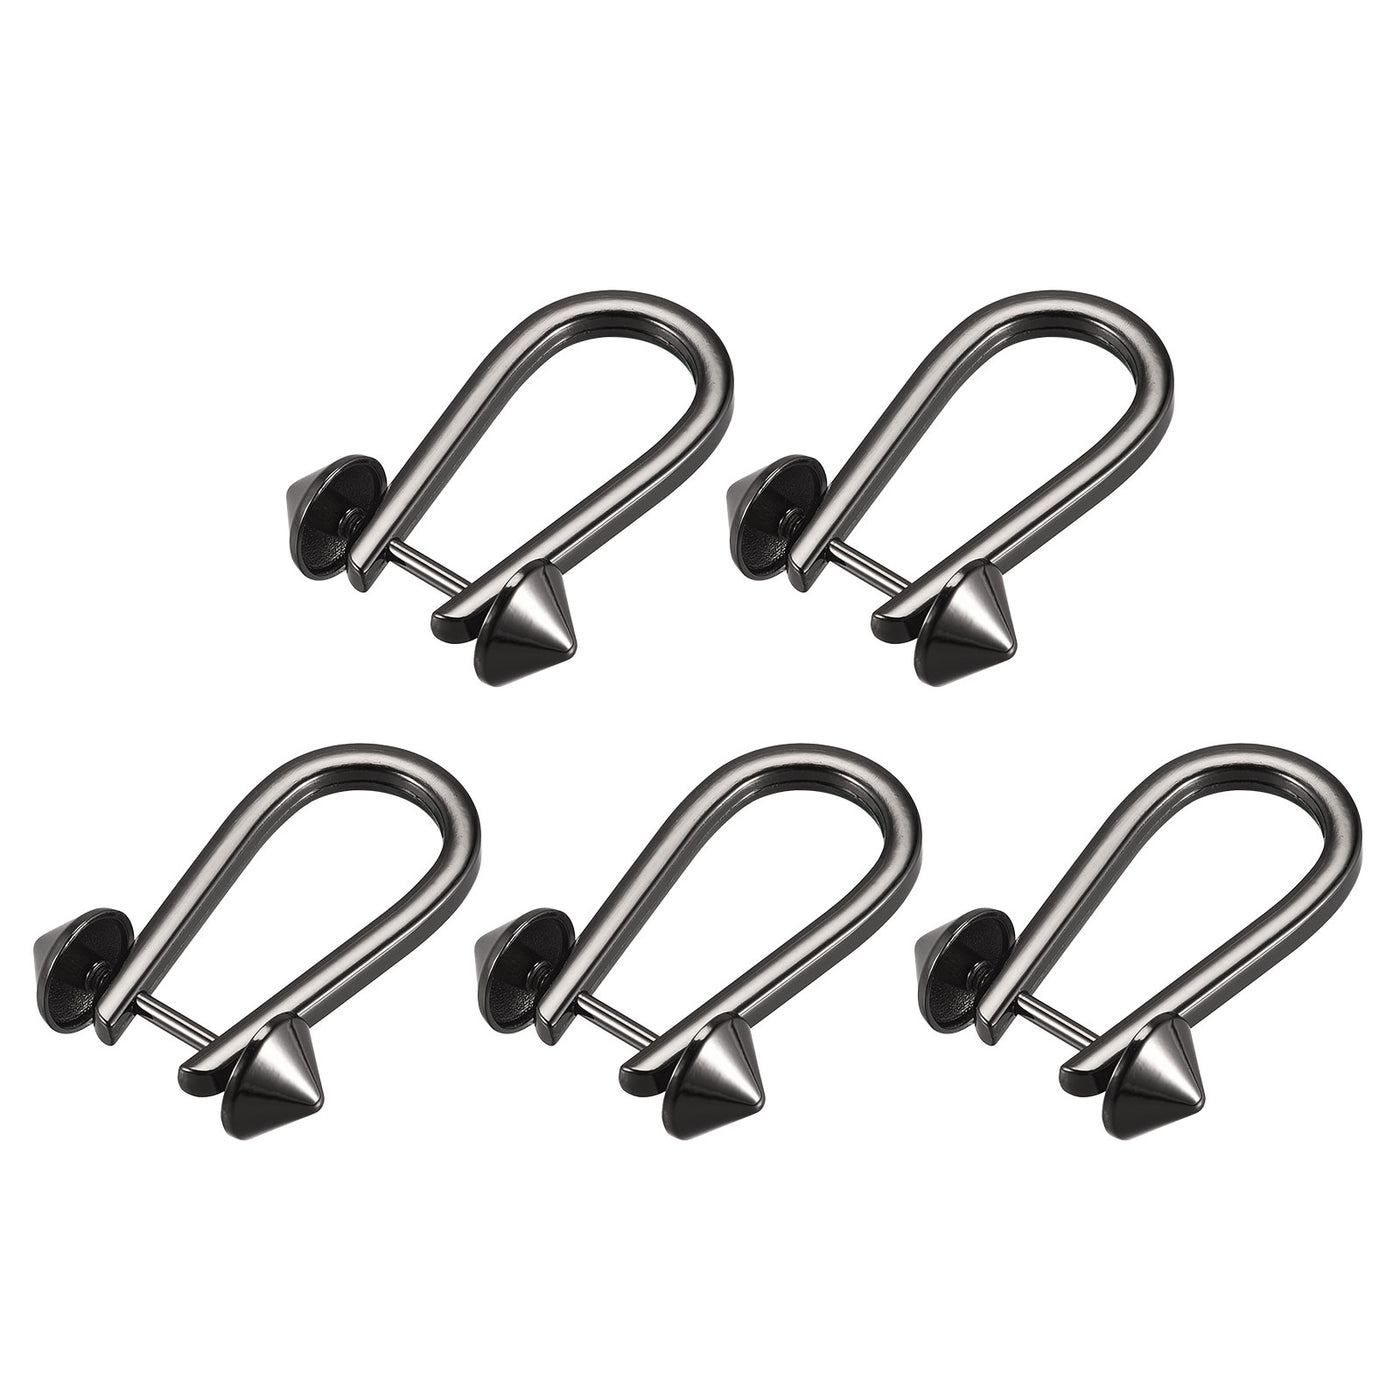 Uxcell Uxcell D-Rings Screw in Shackle, 5Pcs 50mm Horseshoe U Shape D Ring for Bags DIY, Black